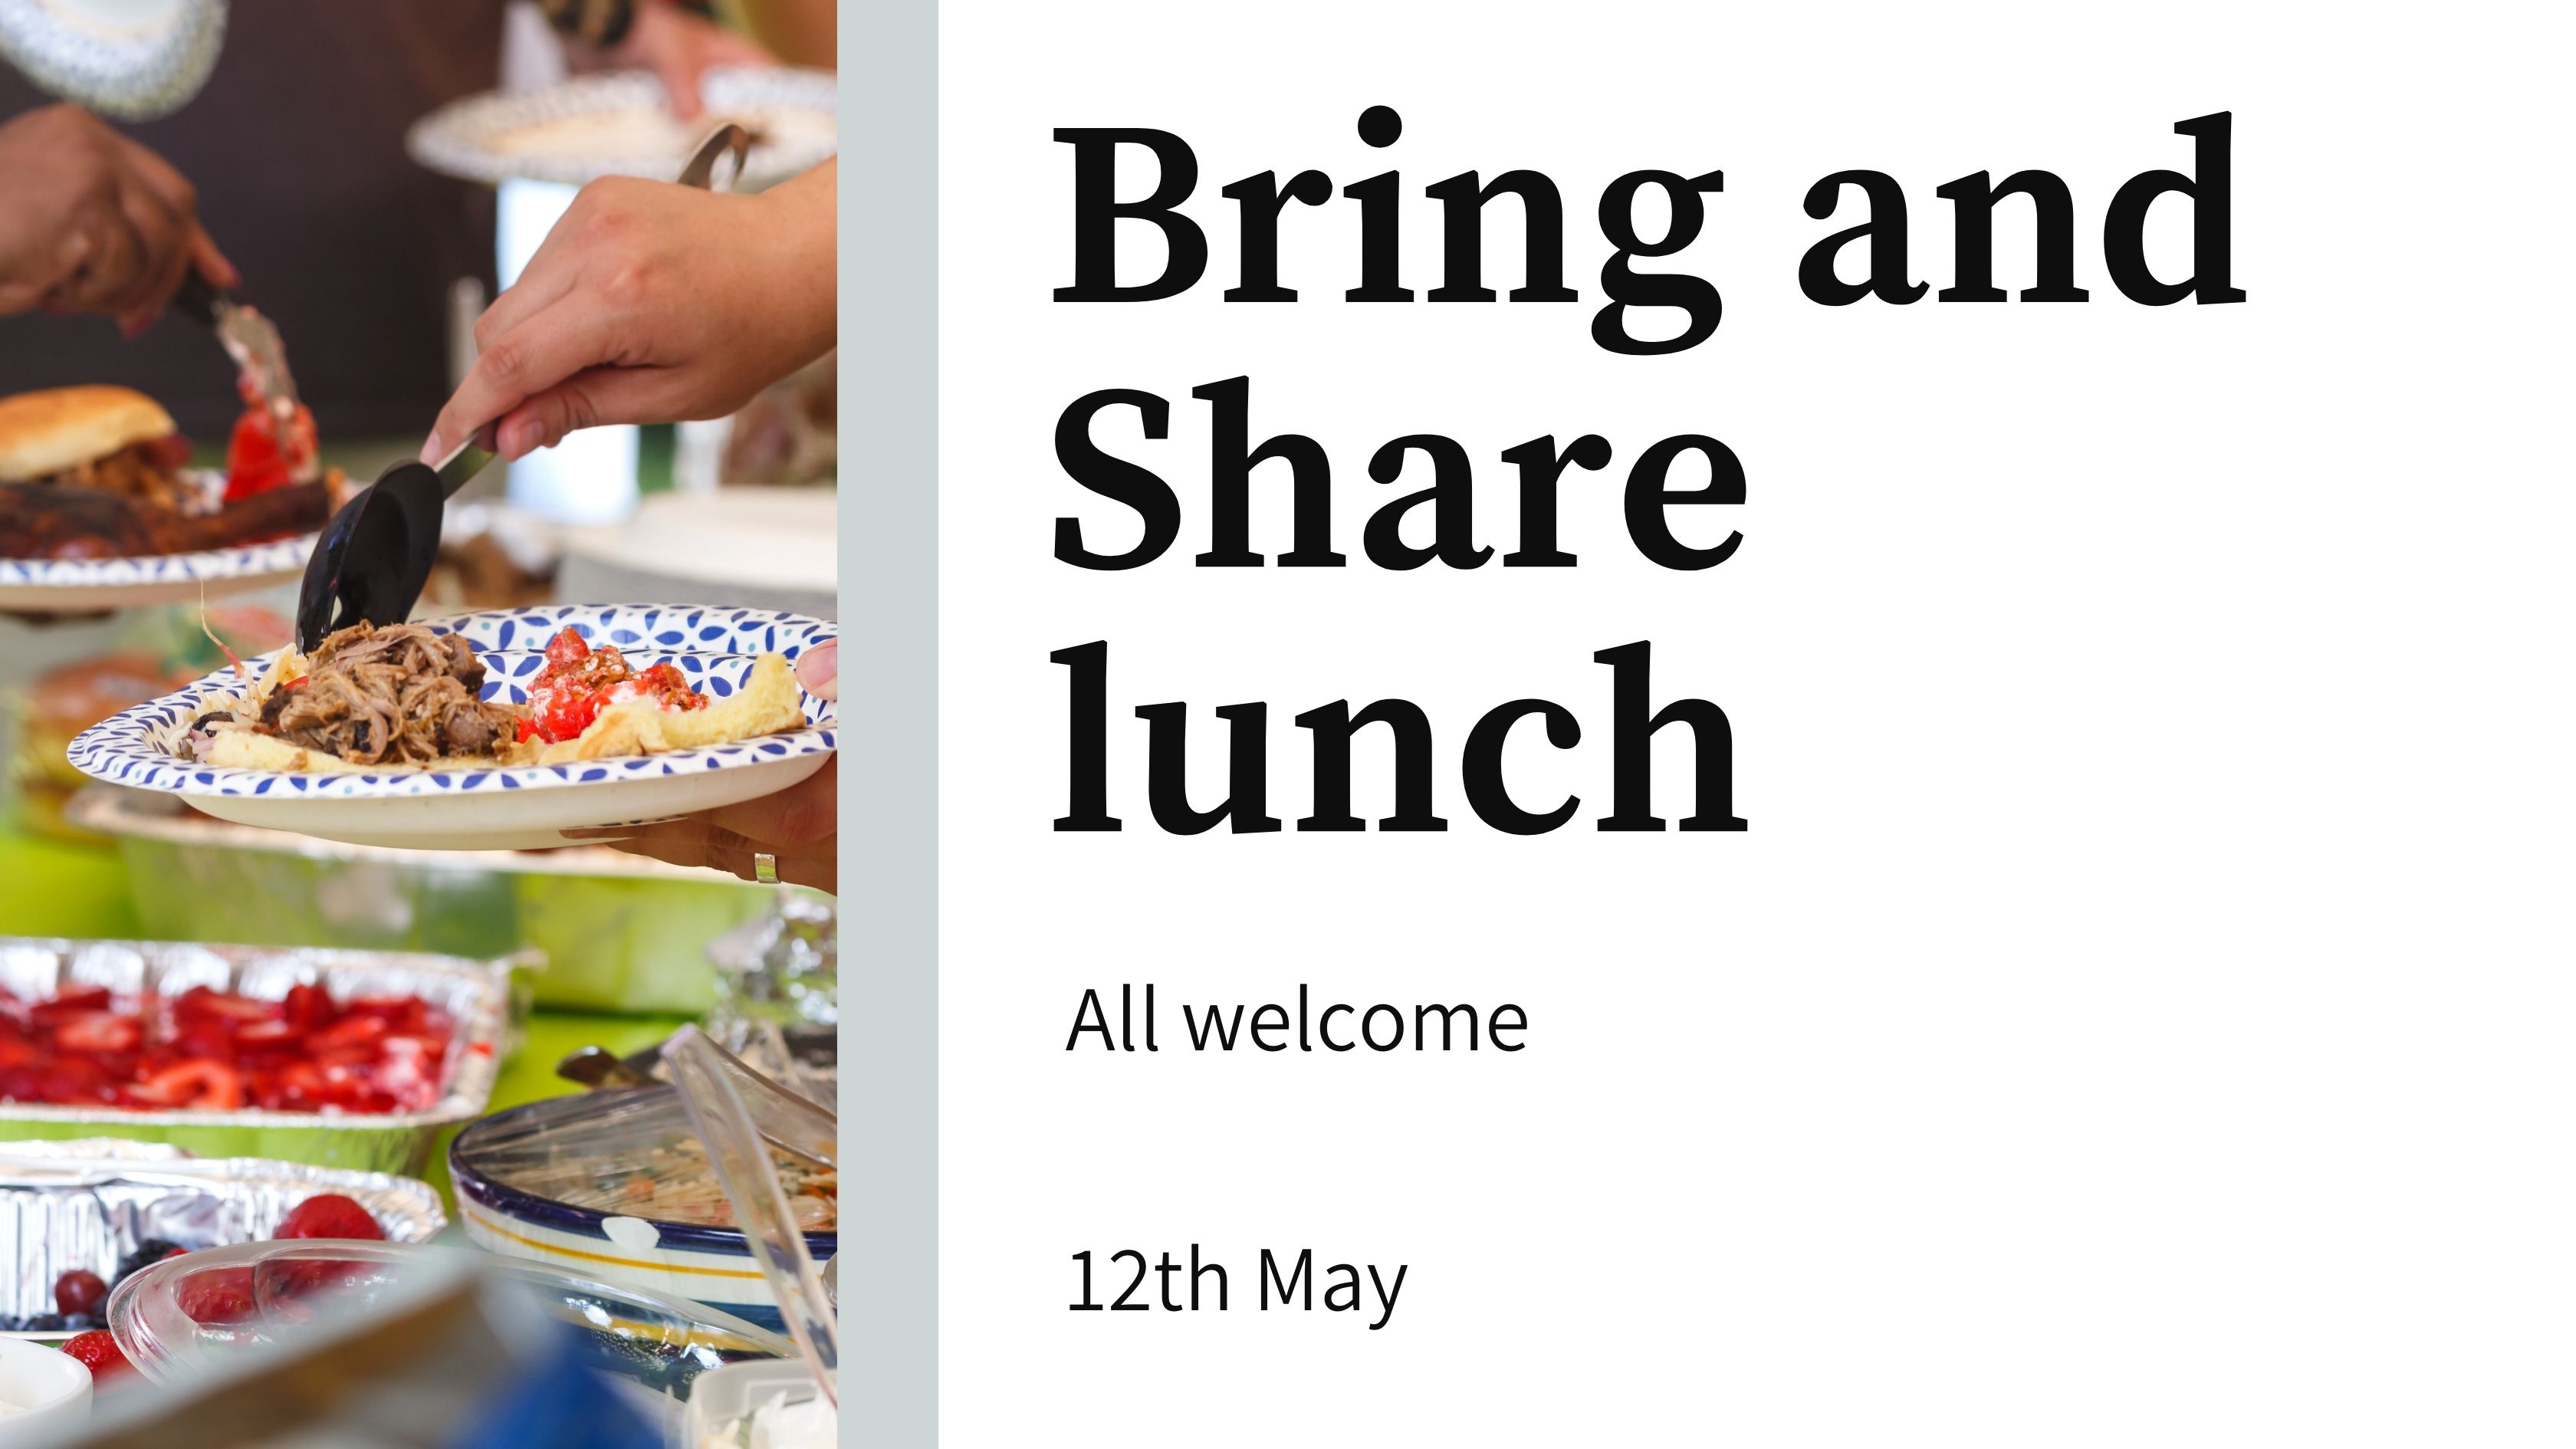 Bring and Share lunch